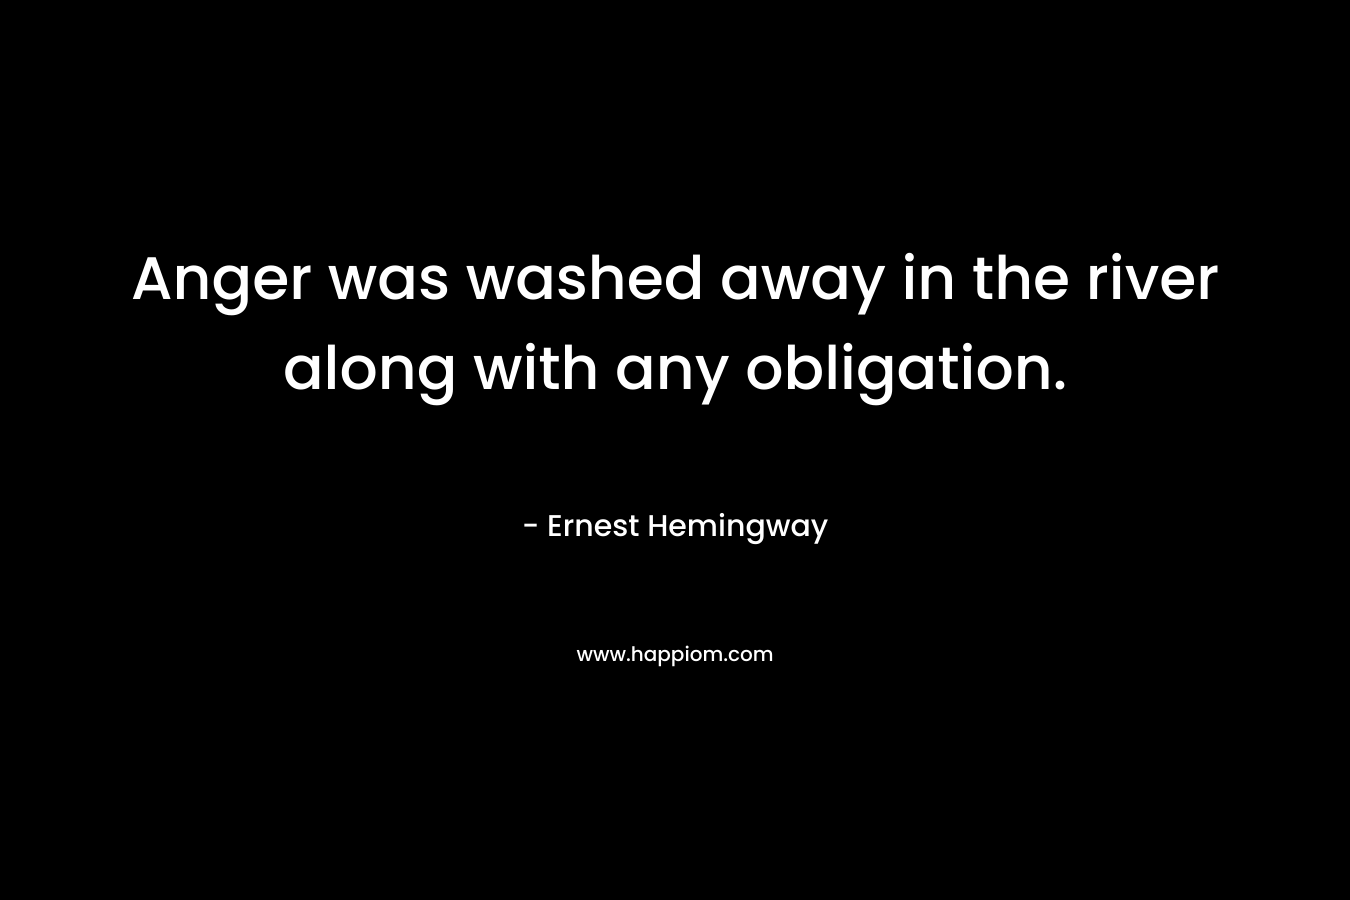 Anger was washed away in the river along with any obligation.